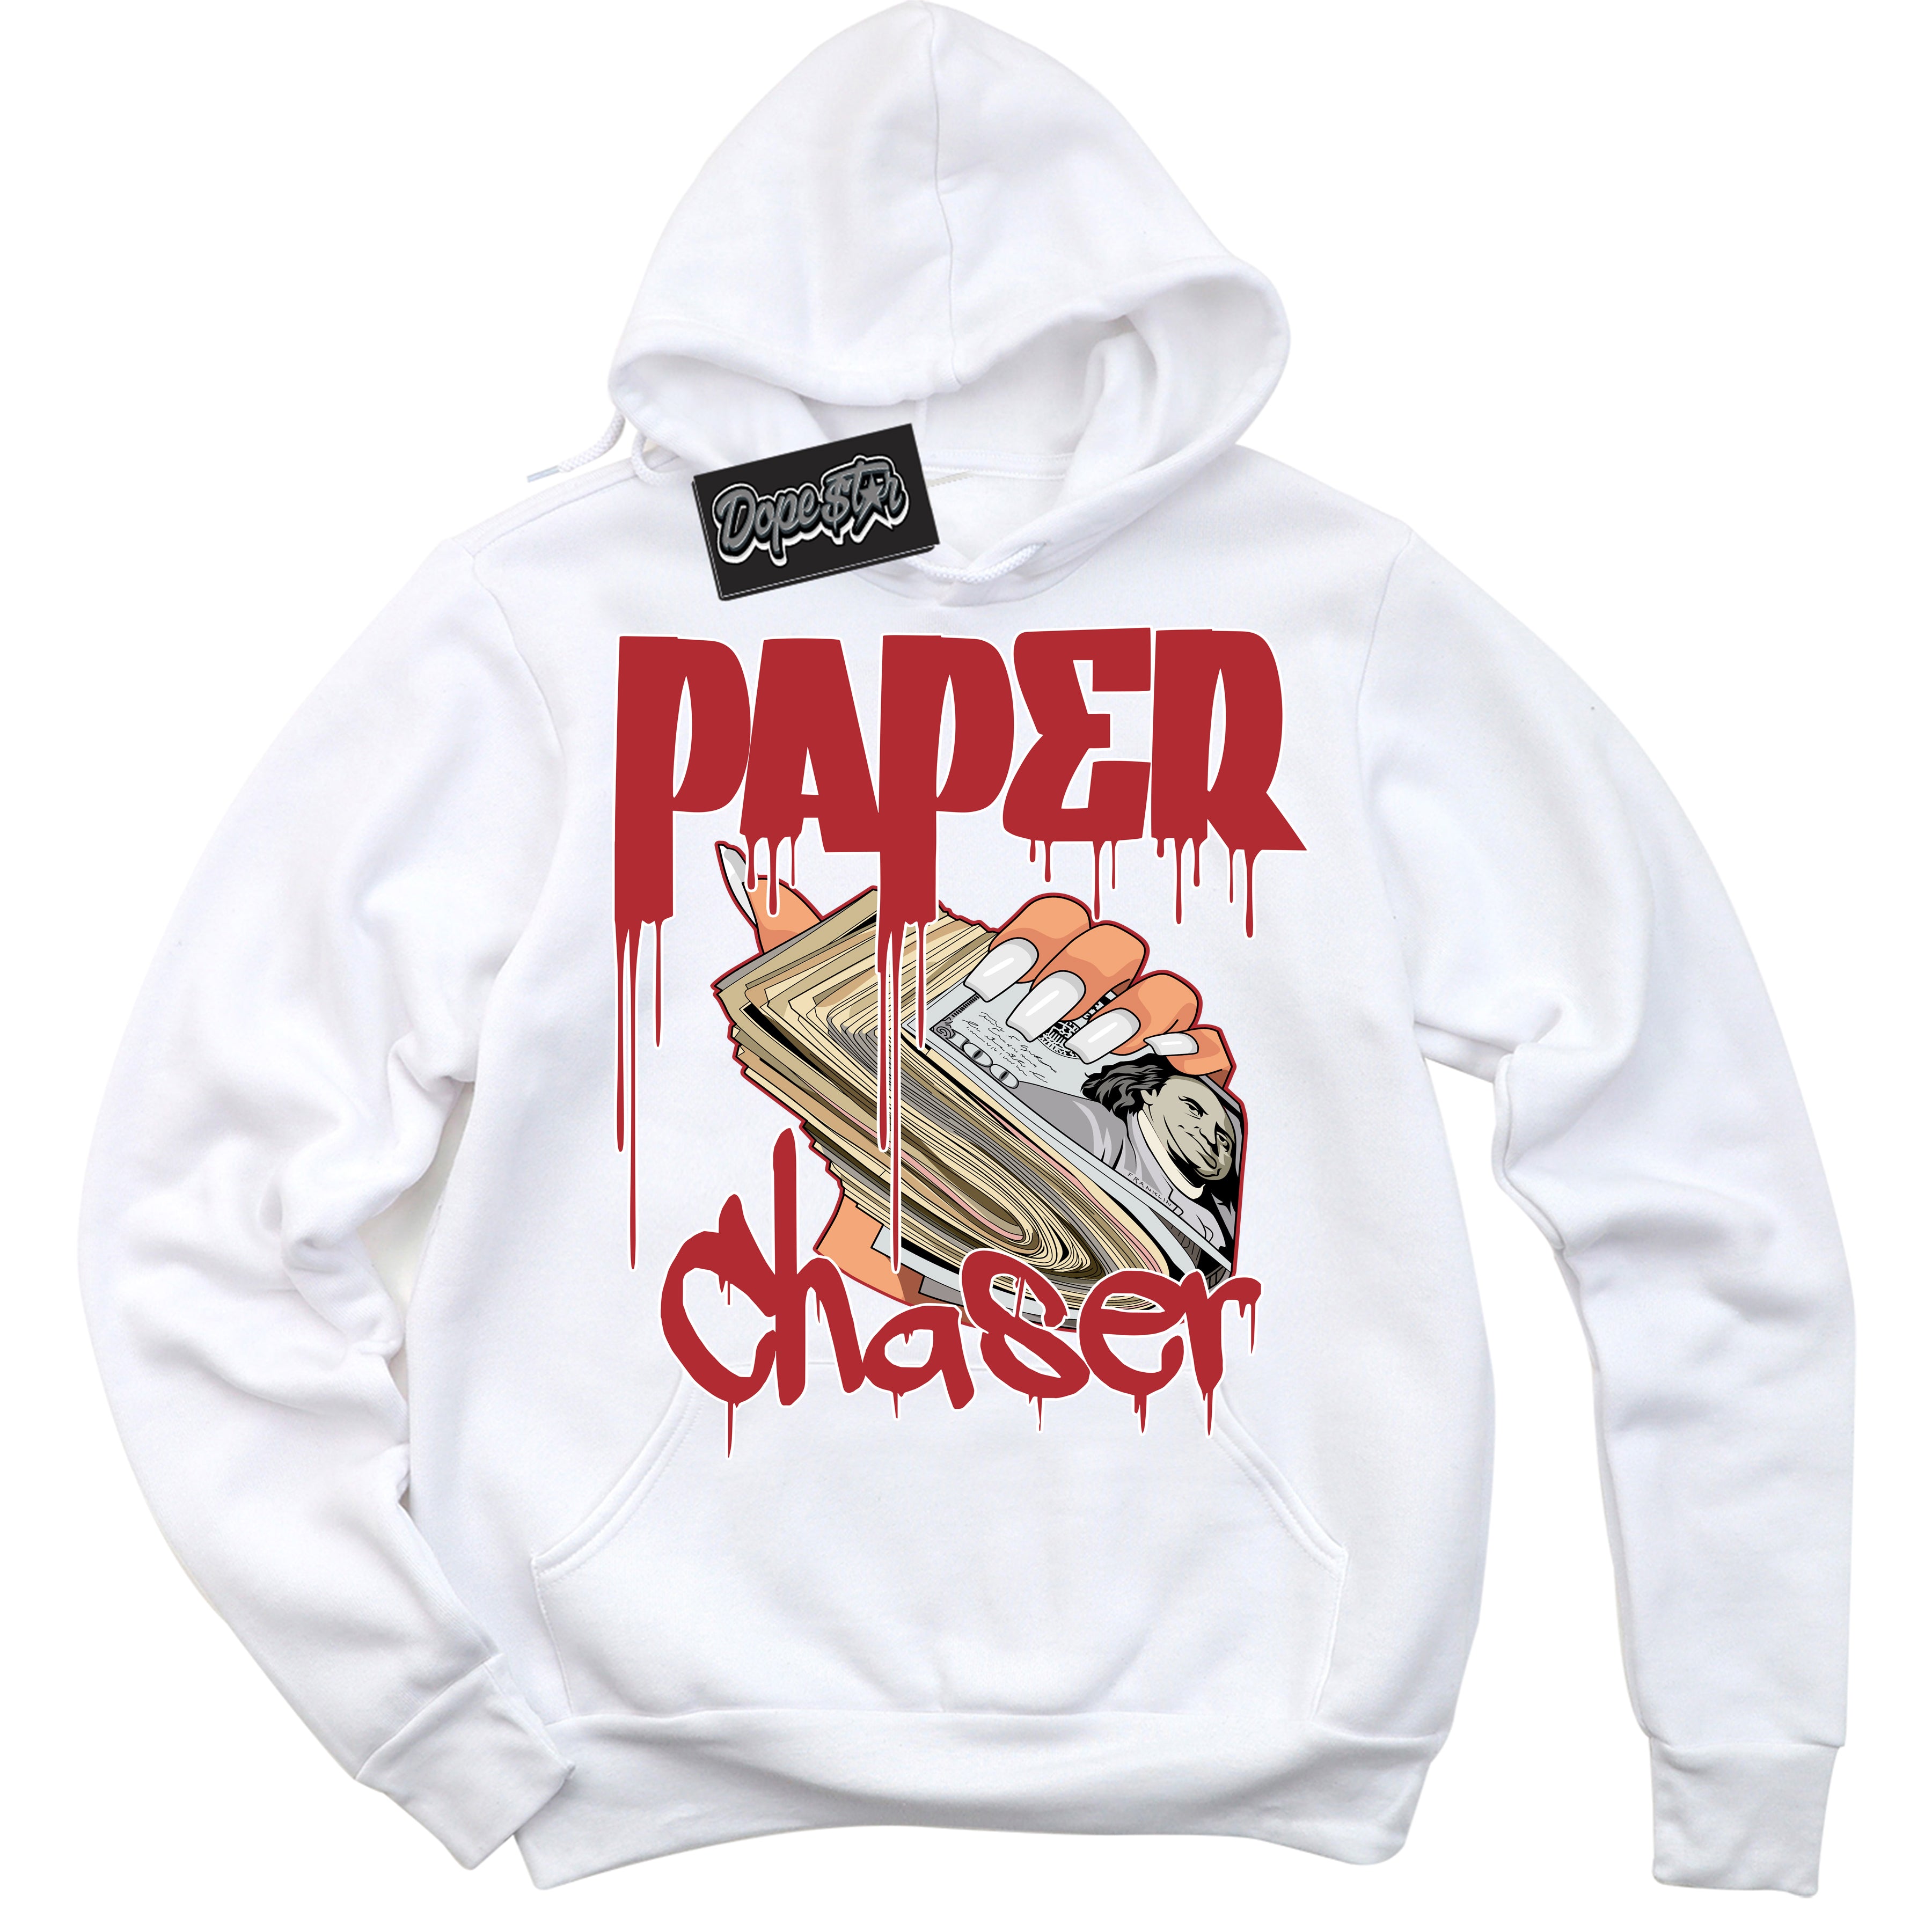 Cool White Hoodie With “ Paper Chaser “  Design That Perfectly Matches Lost And Found 1s Sneakers.